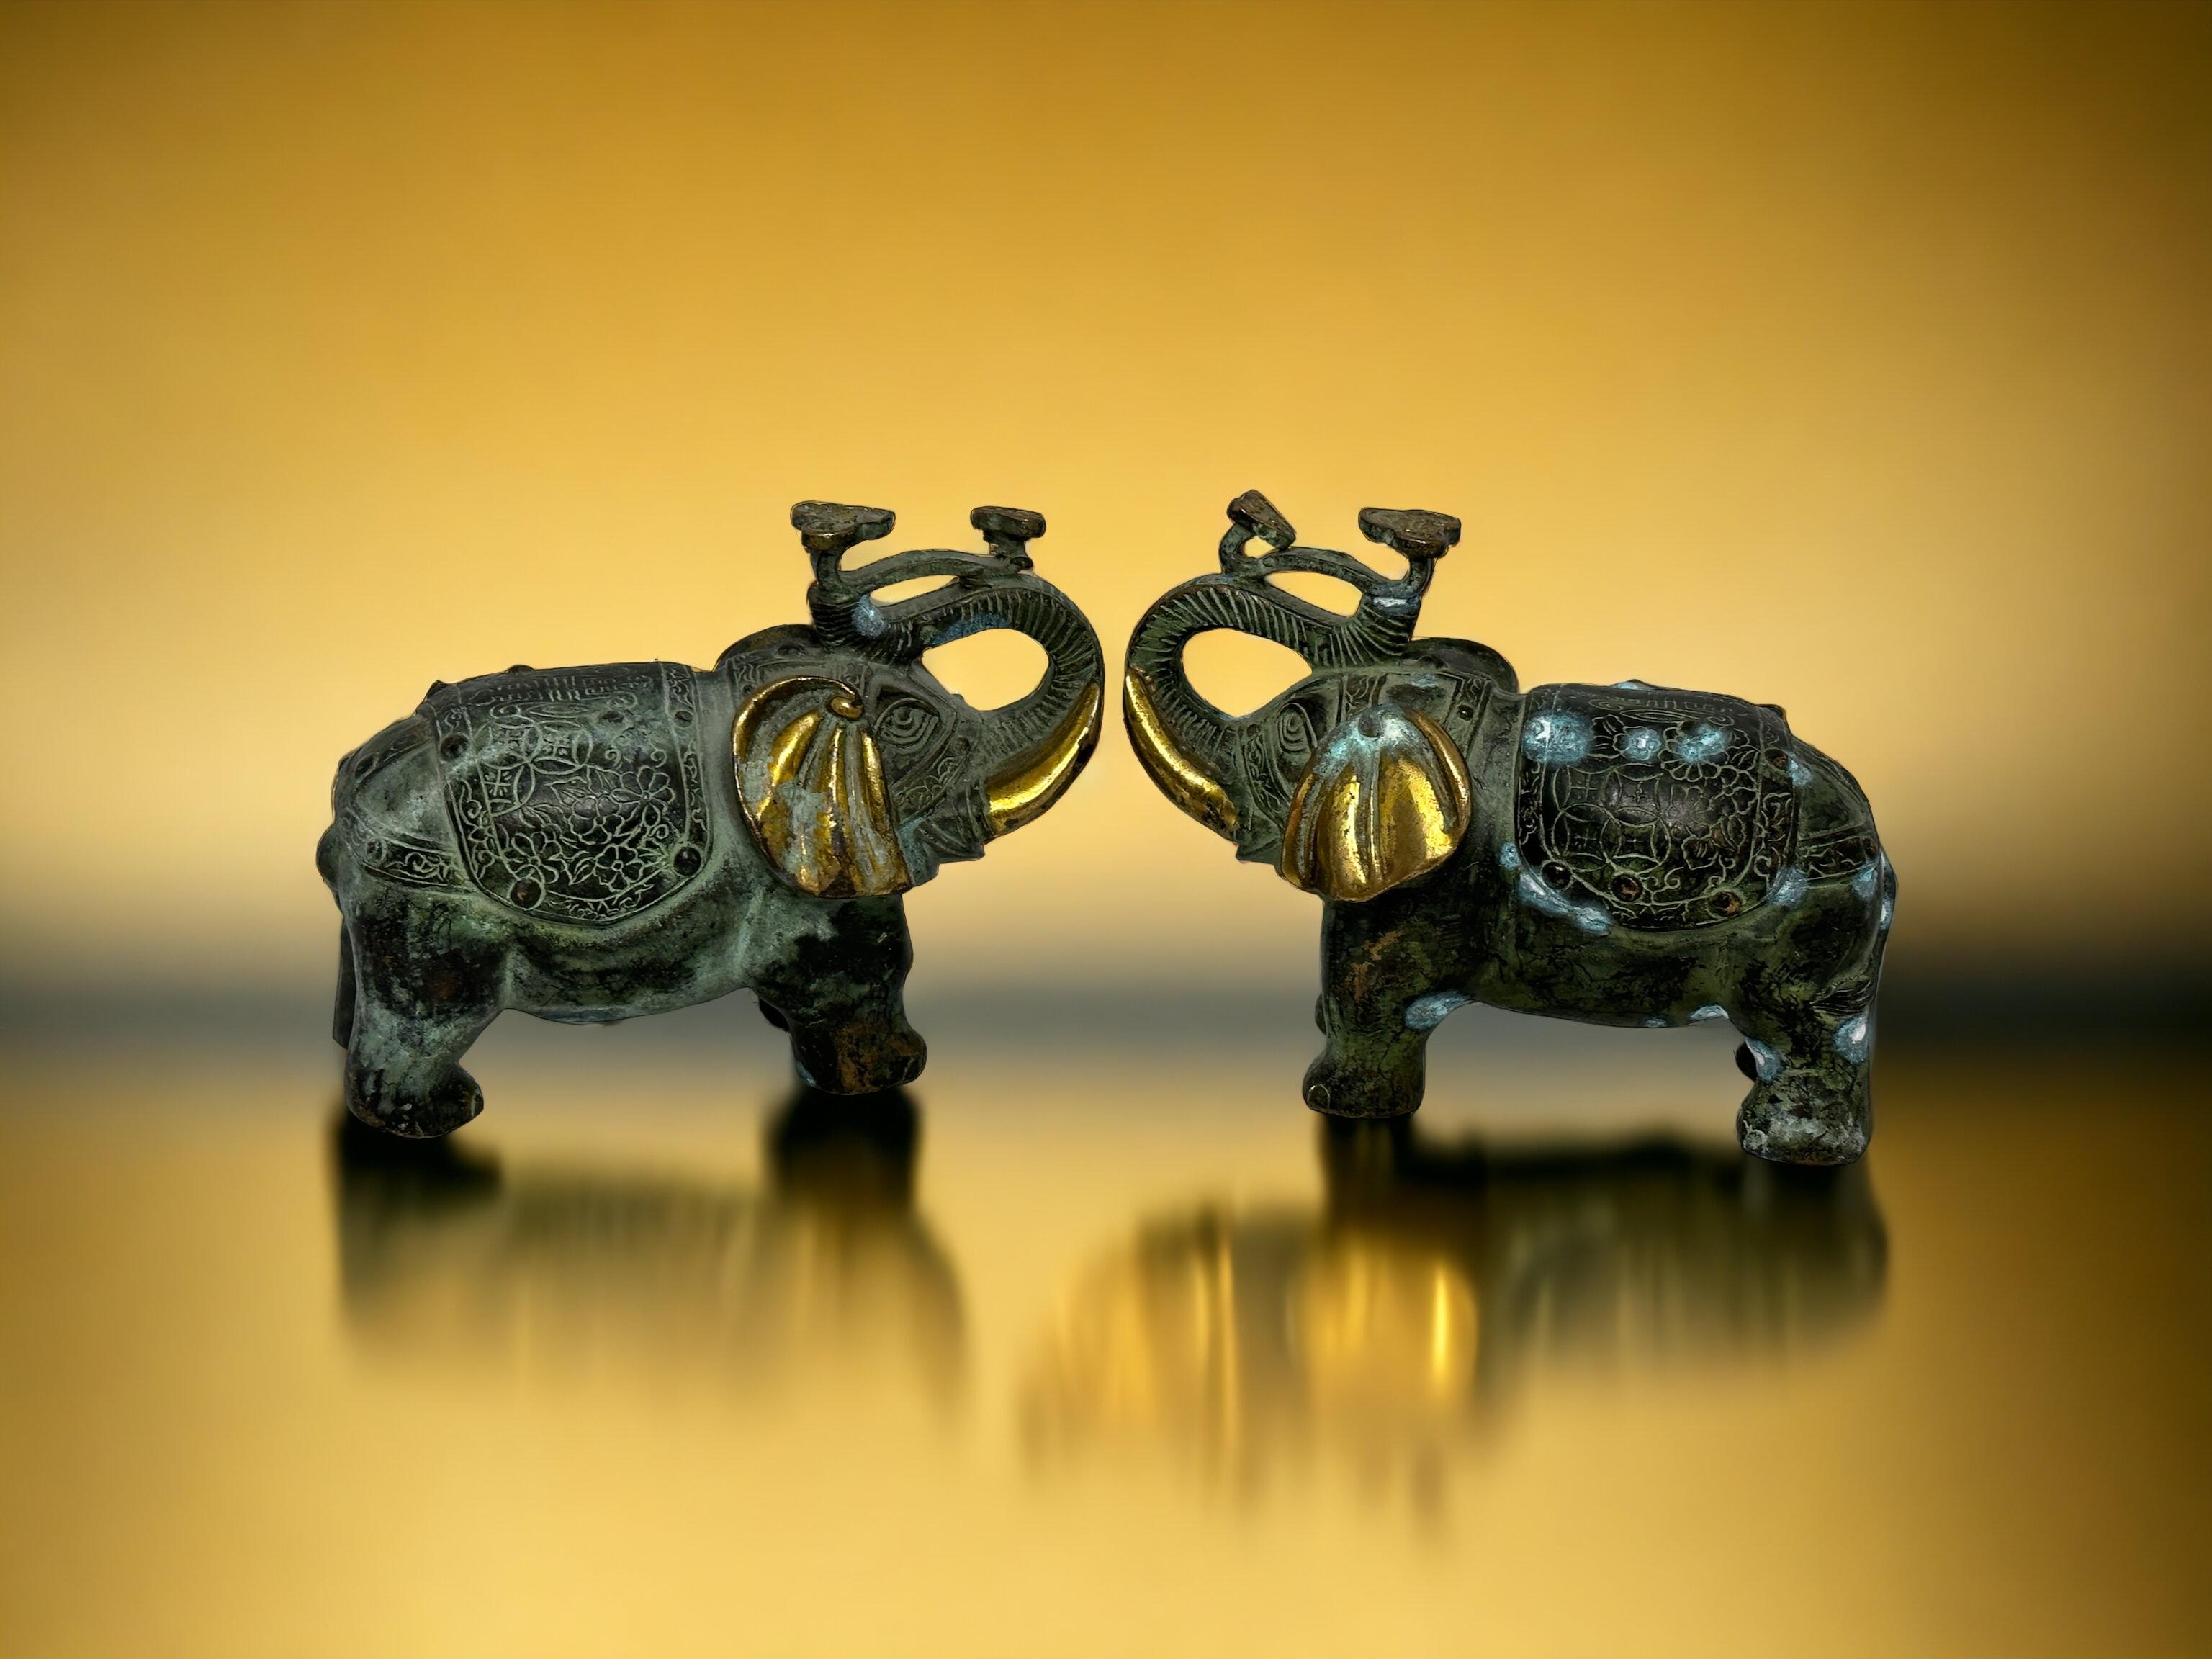 A decorative hand made pair elephant sculptures or statues. Some wear but this is old-age. Made of brass or bronze. We think it is from Asia and was made in the mid-20th century. Very Decorative and a nice addition to any collection. Size given in